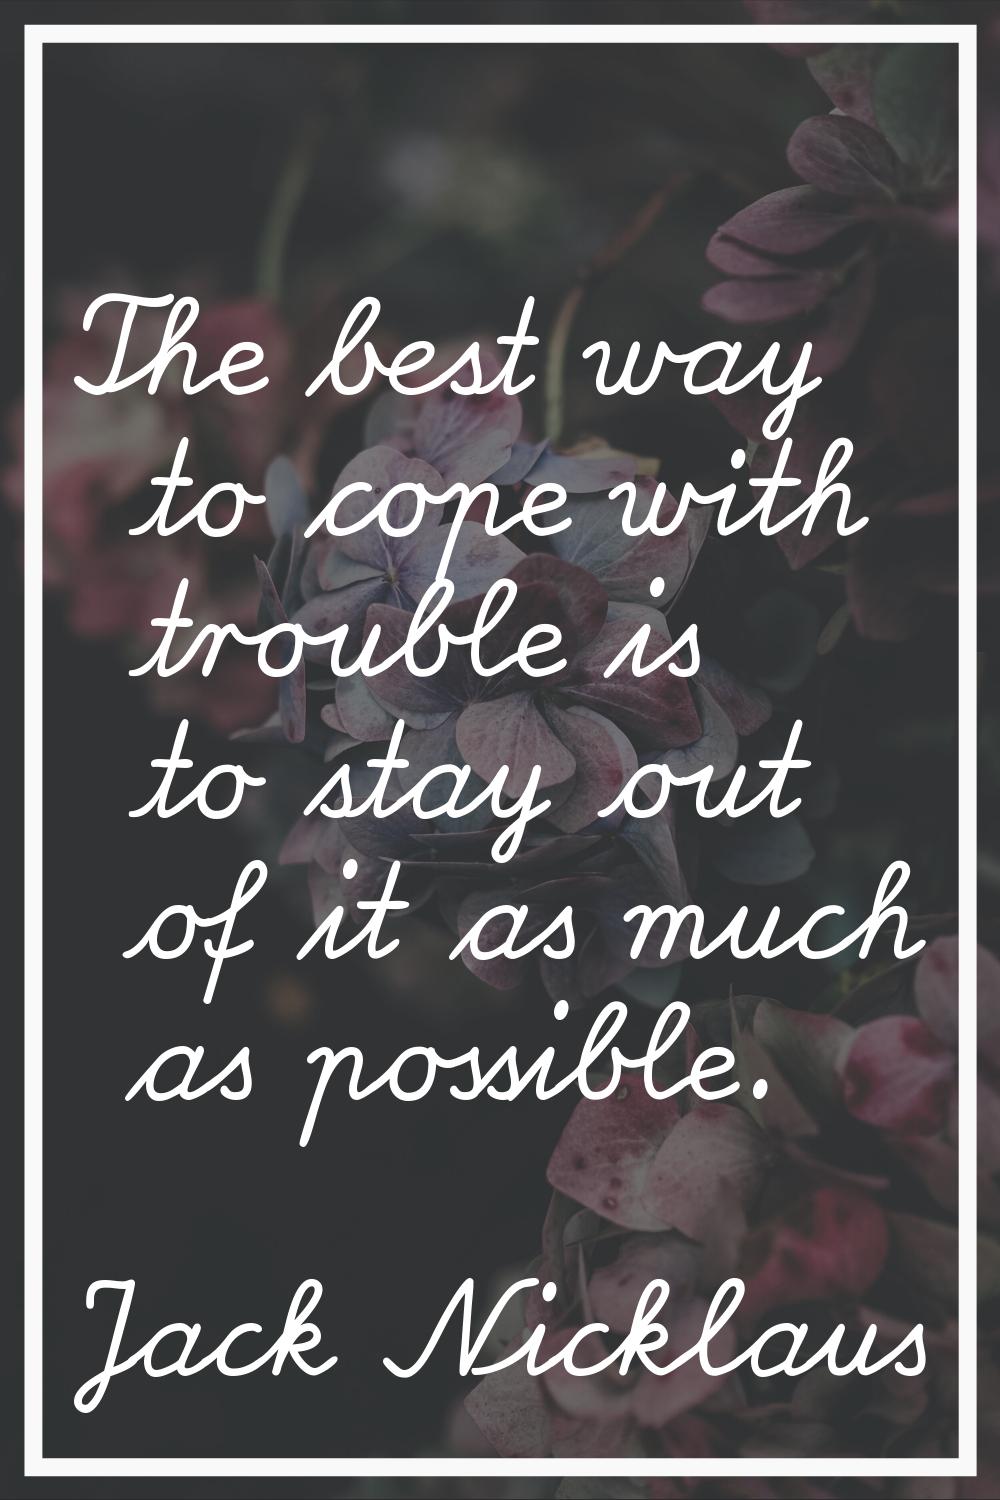 The best way to cope with trouble is to stay out of it as much as possible.